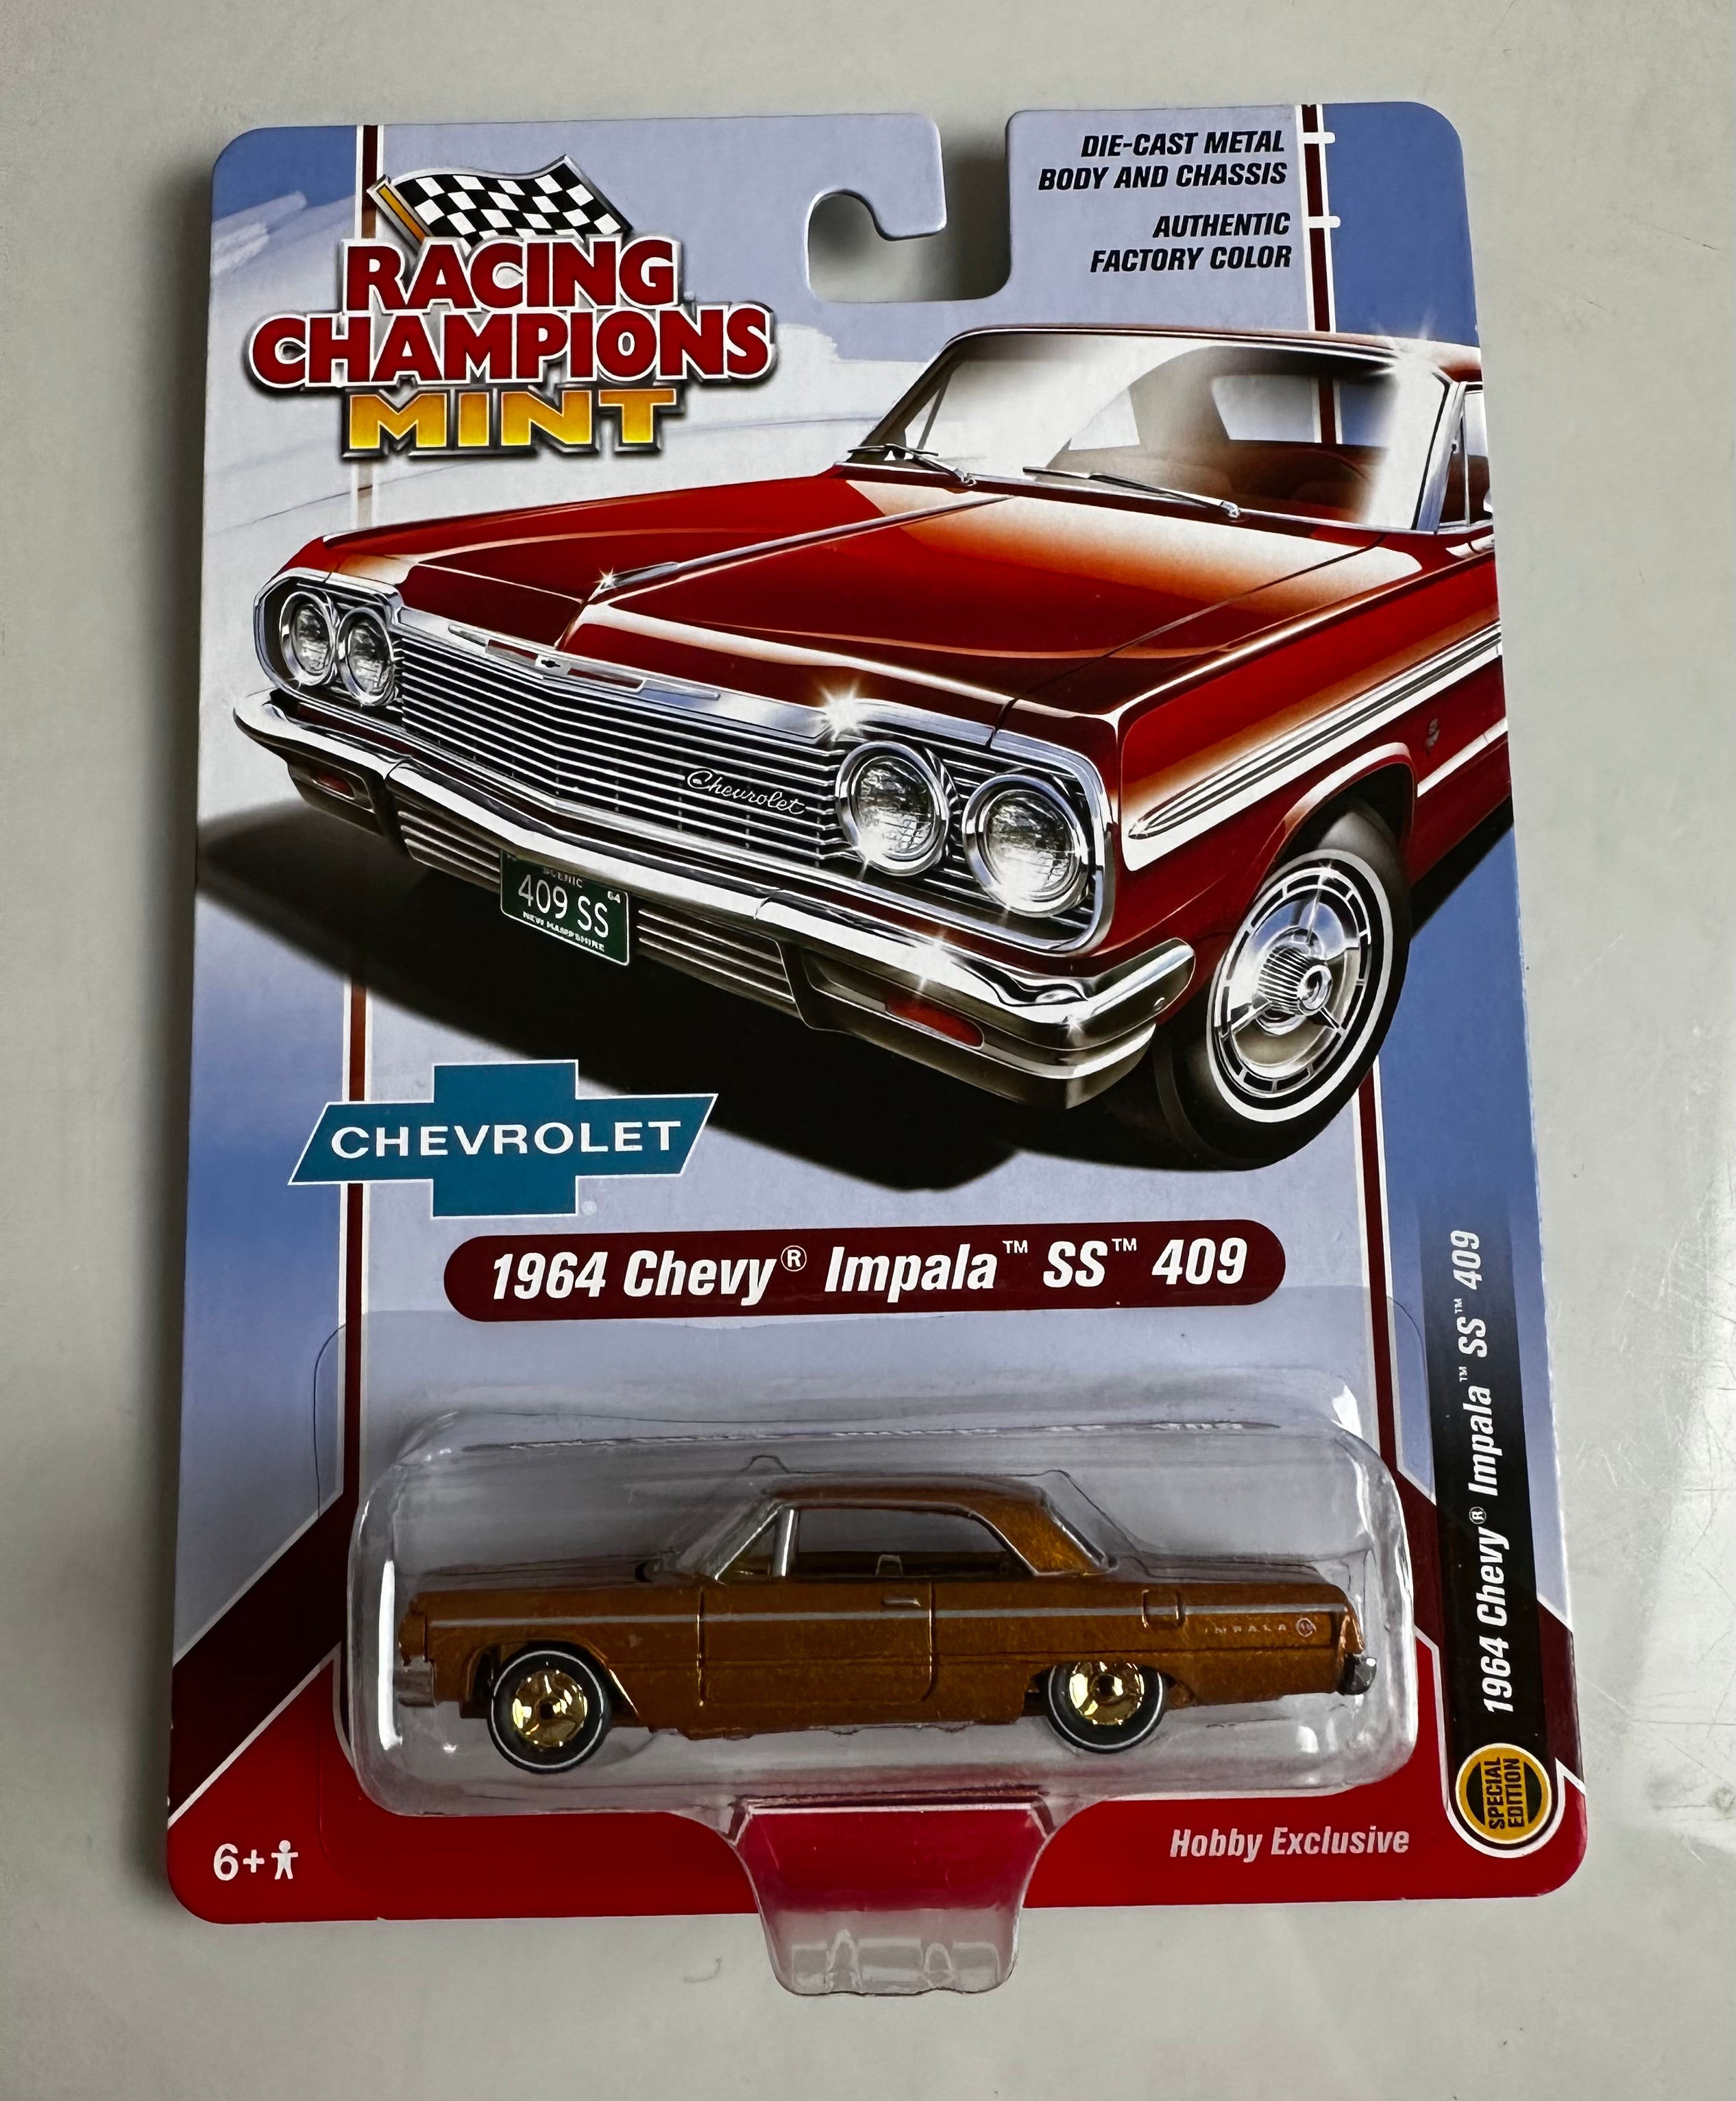 1/64 1964 CHEVY IMPALA SS 409 - RACING CHAMPIONS “CHASE” (GOLD BODY AND GLOD RIMS VARIATION)